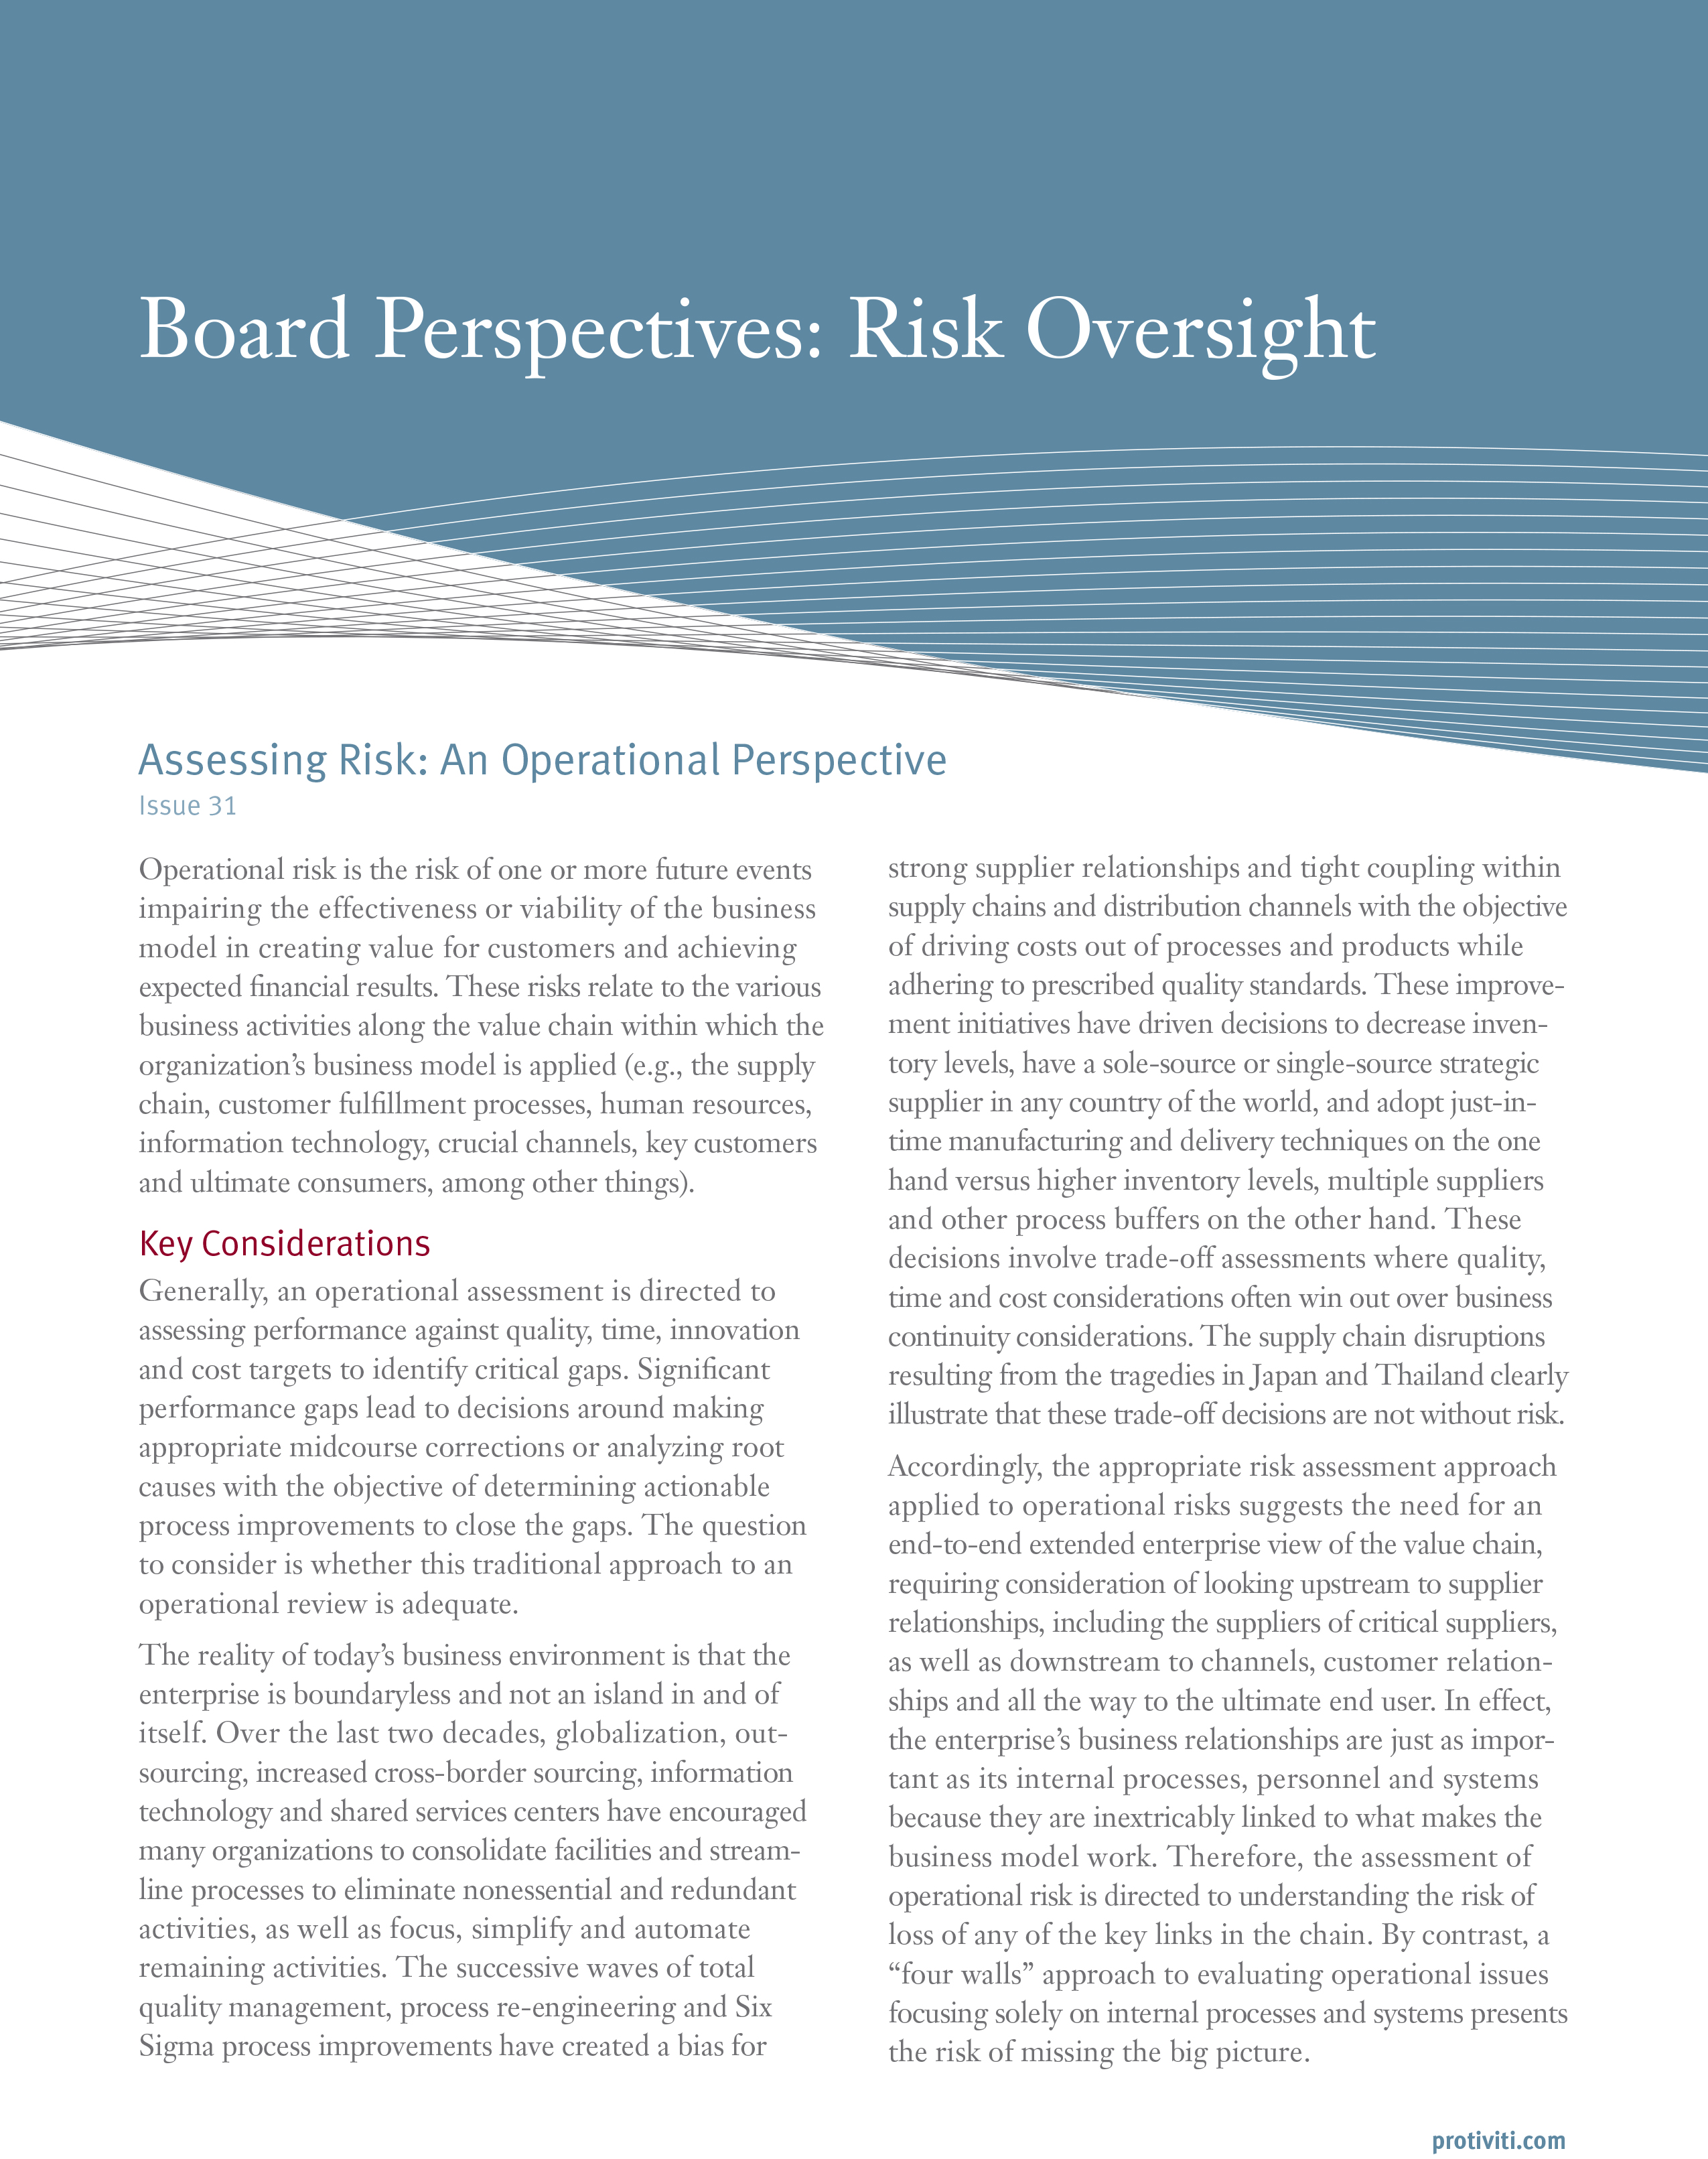 Screenshot of the first page of Assessing Risk-An Operational Perspective.